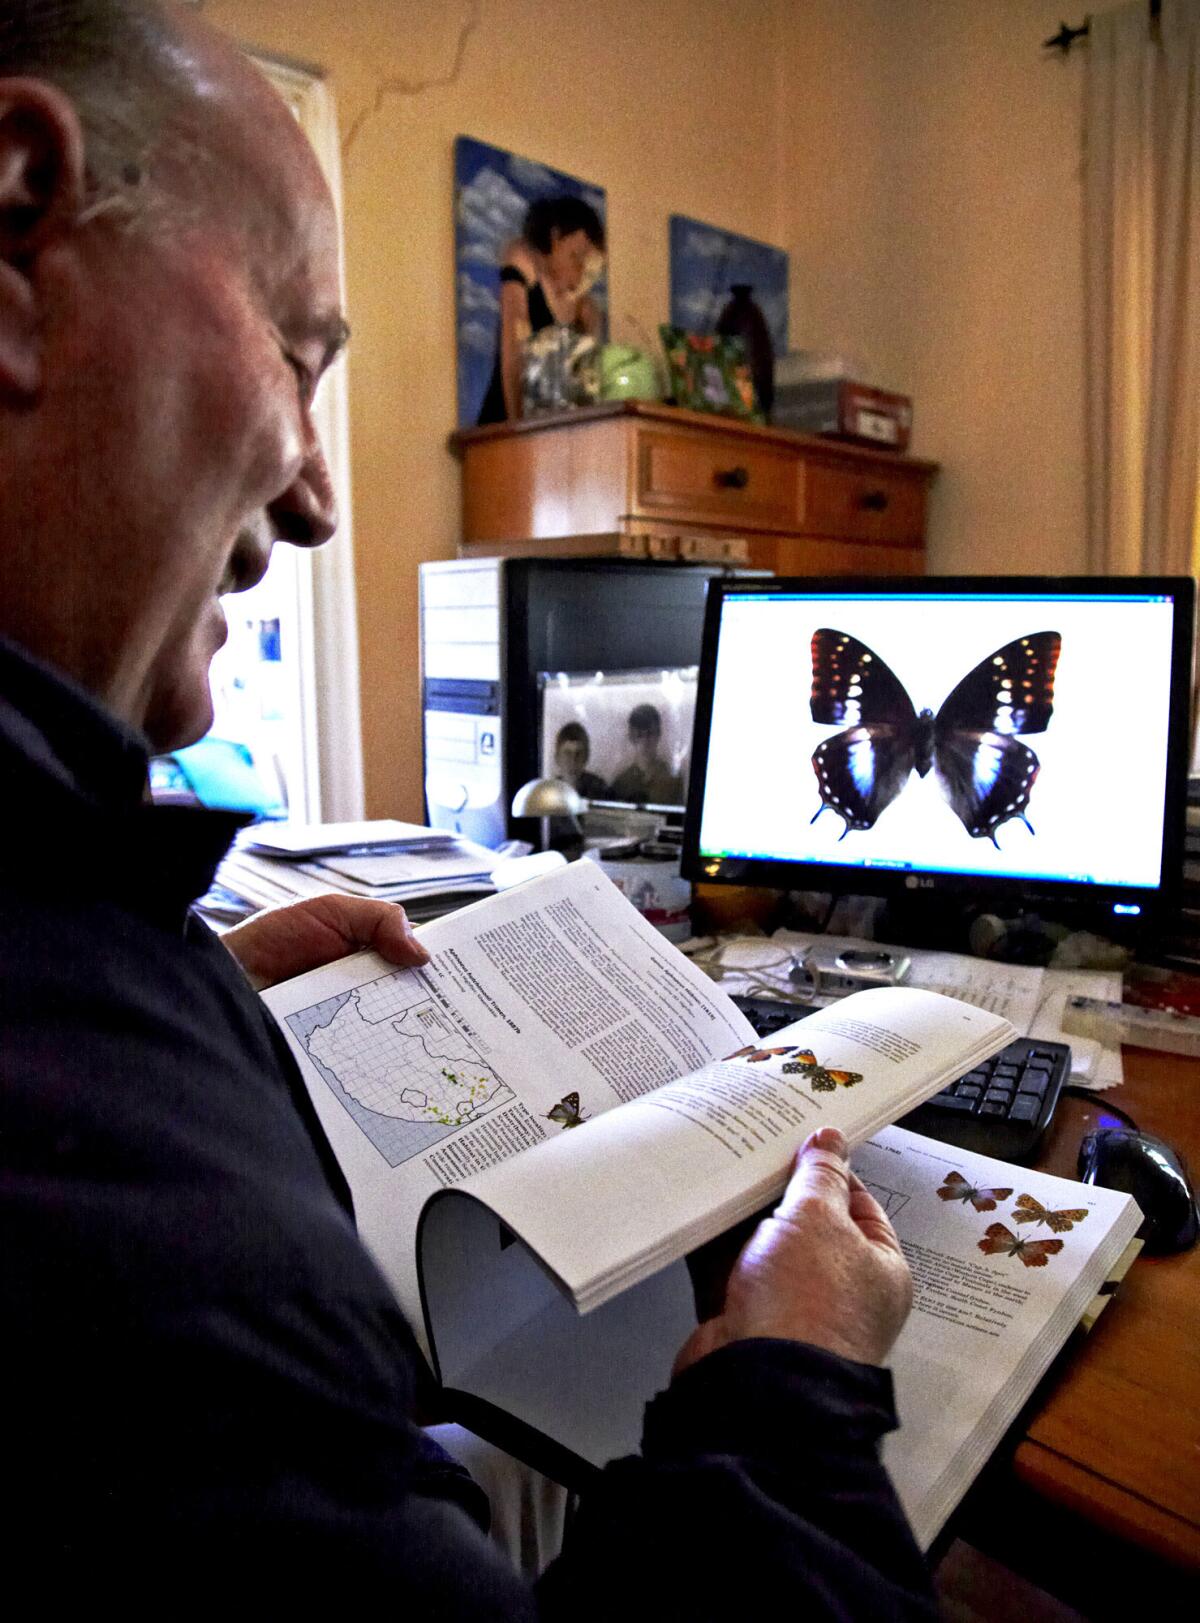 Mark Williams pages through a butterfly book he co-wrote. "I'm being called the Butterfly Whisperer," Williams says. "I'd love to go out with that title. Mark Williams, the Butterfly Whisperer."